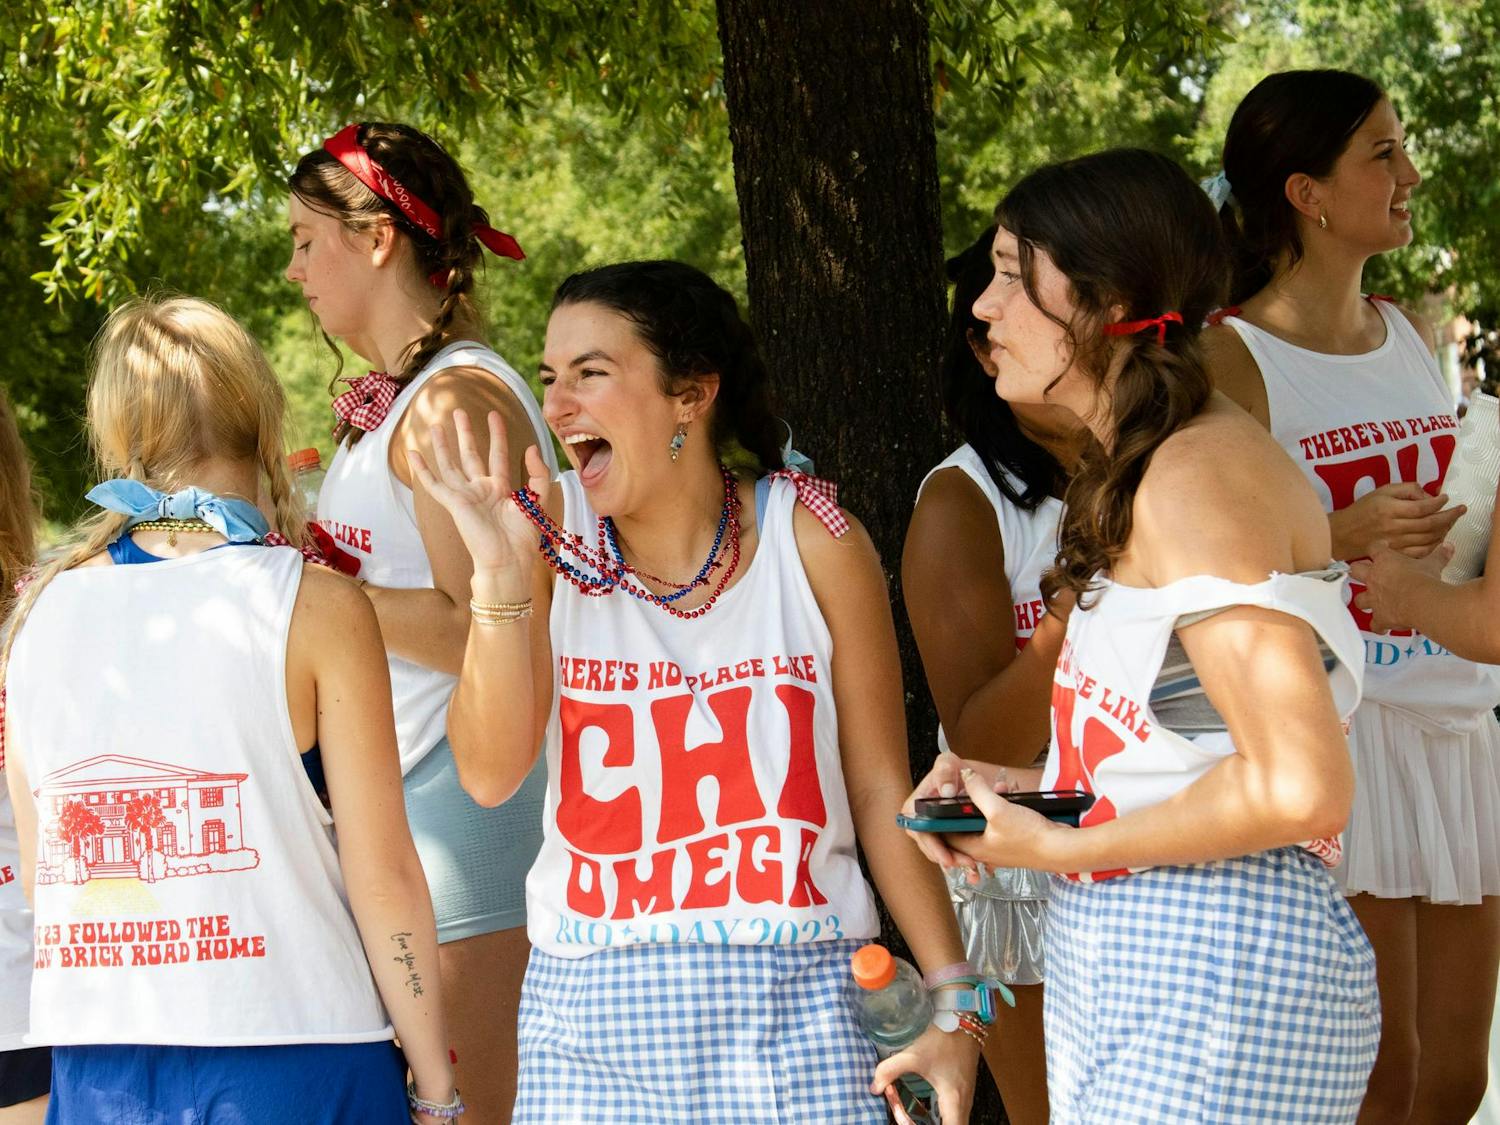 Chi Omega sisters wear shirts saying "There's no place like Chi Omega" while cooling off under a tree during Bid Day. The sisters spent time outside, celebrating their new members in temperatures over 90 degrees.